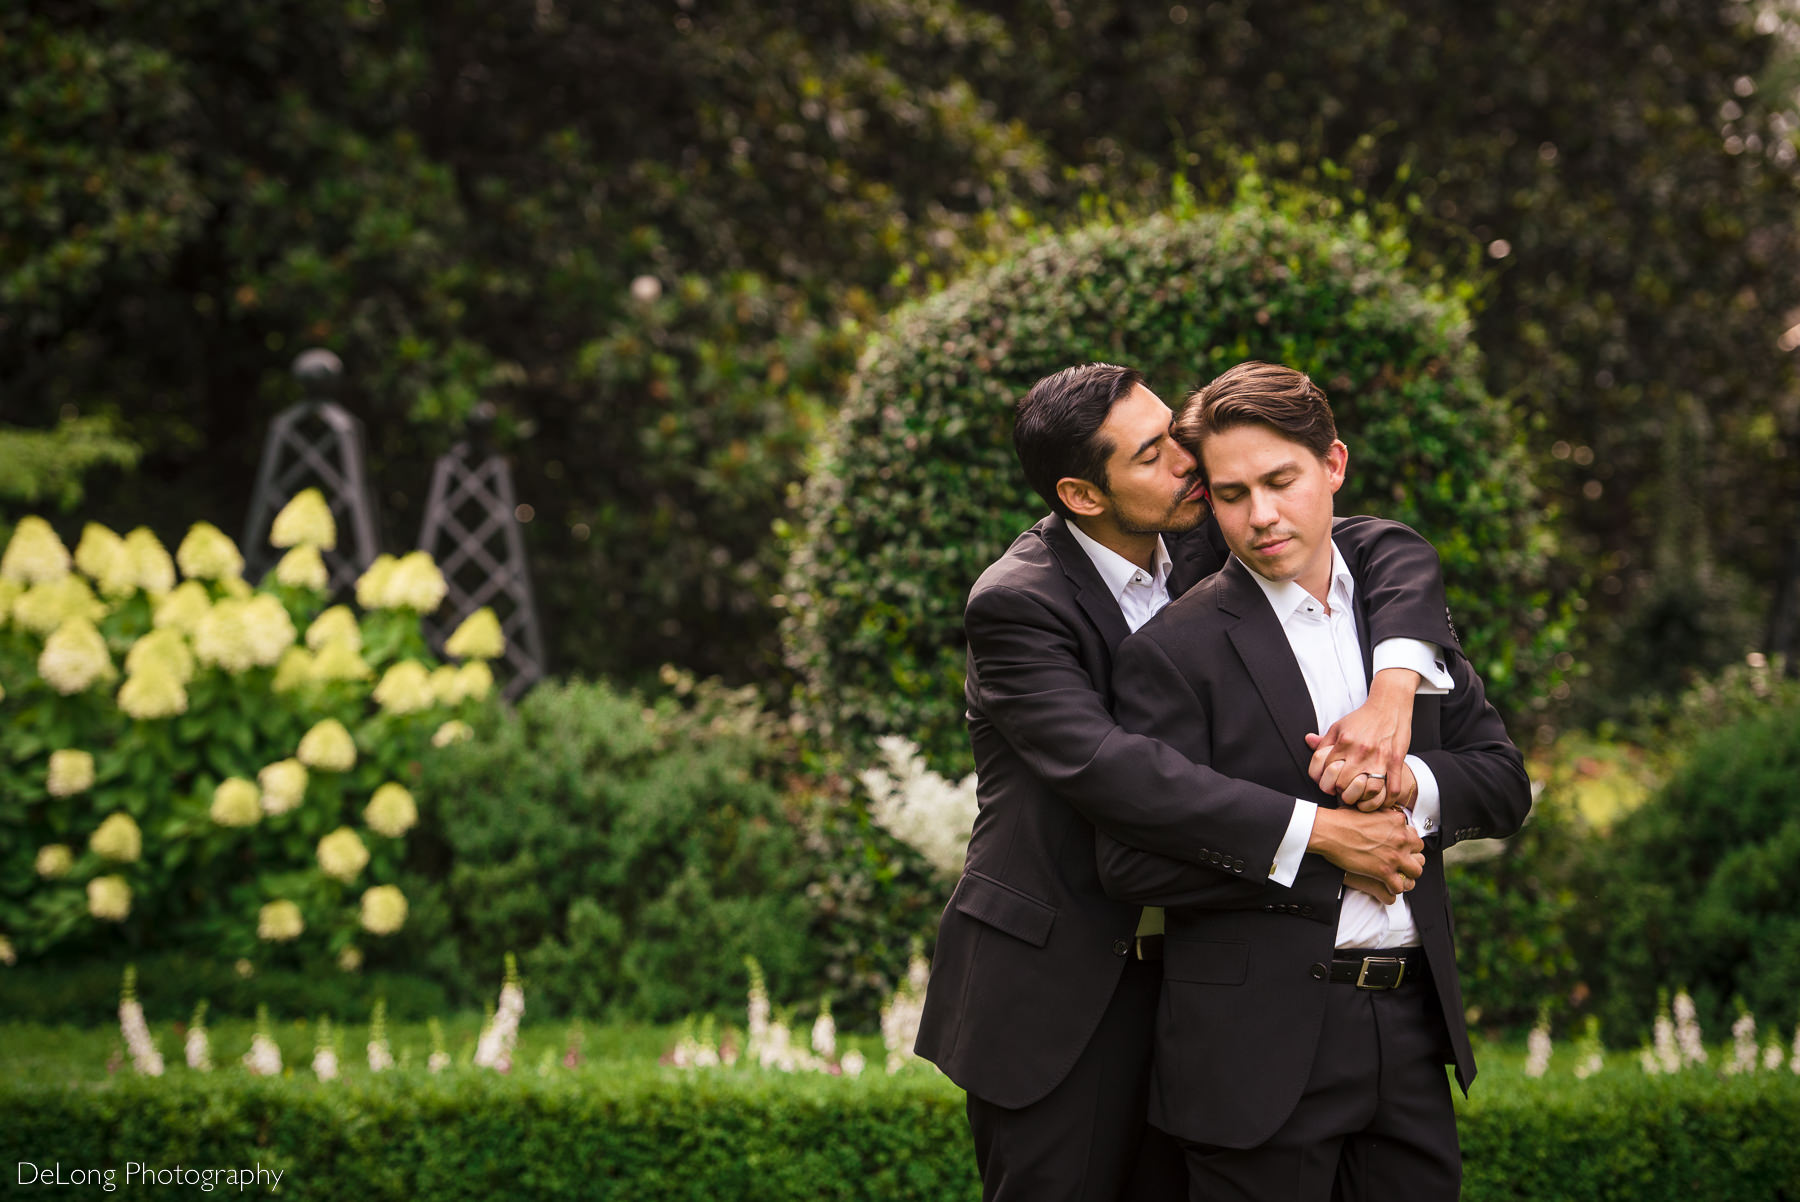 Serene and sweet portrait of a groom getting a kiss on the cheek from his husband in the gardens of the Duke Mansion by Charlotte wedding photographers DeLong Photography